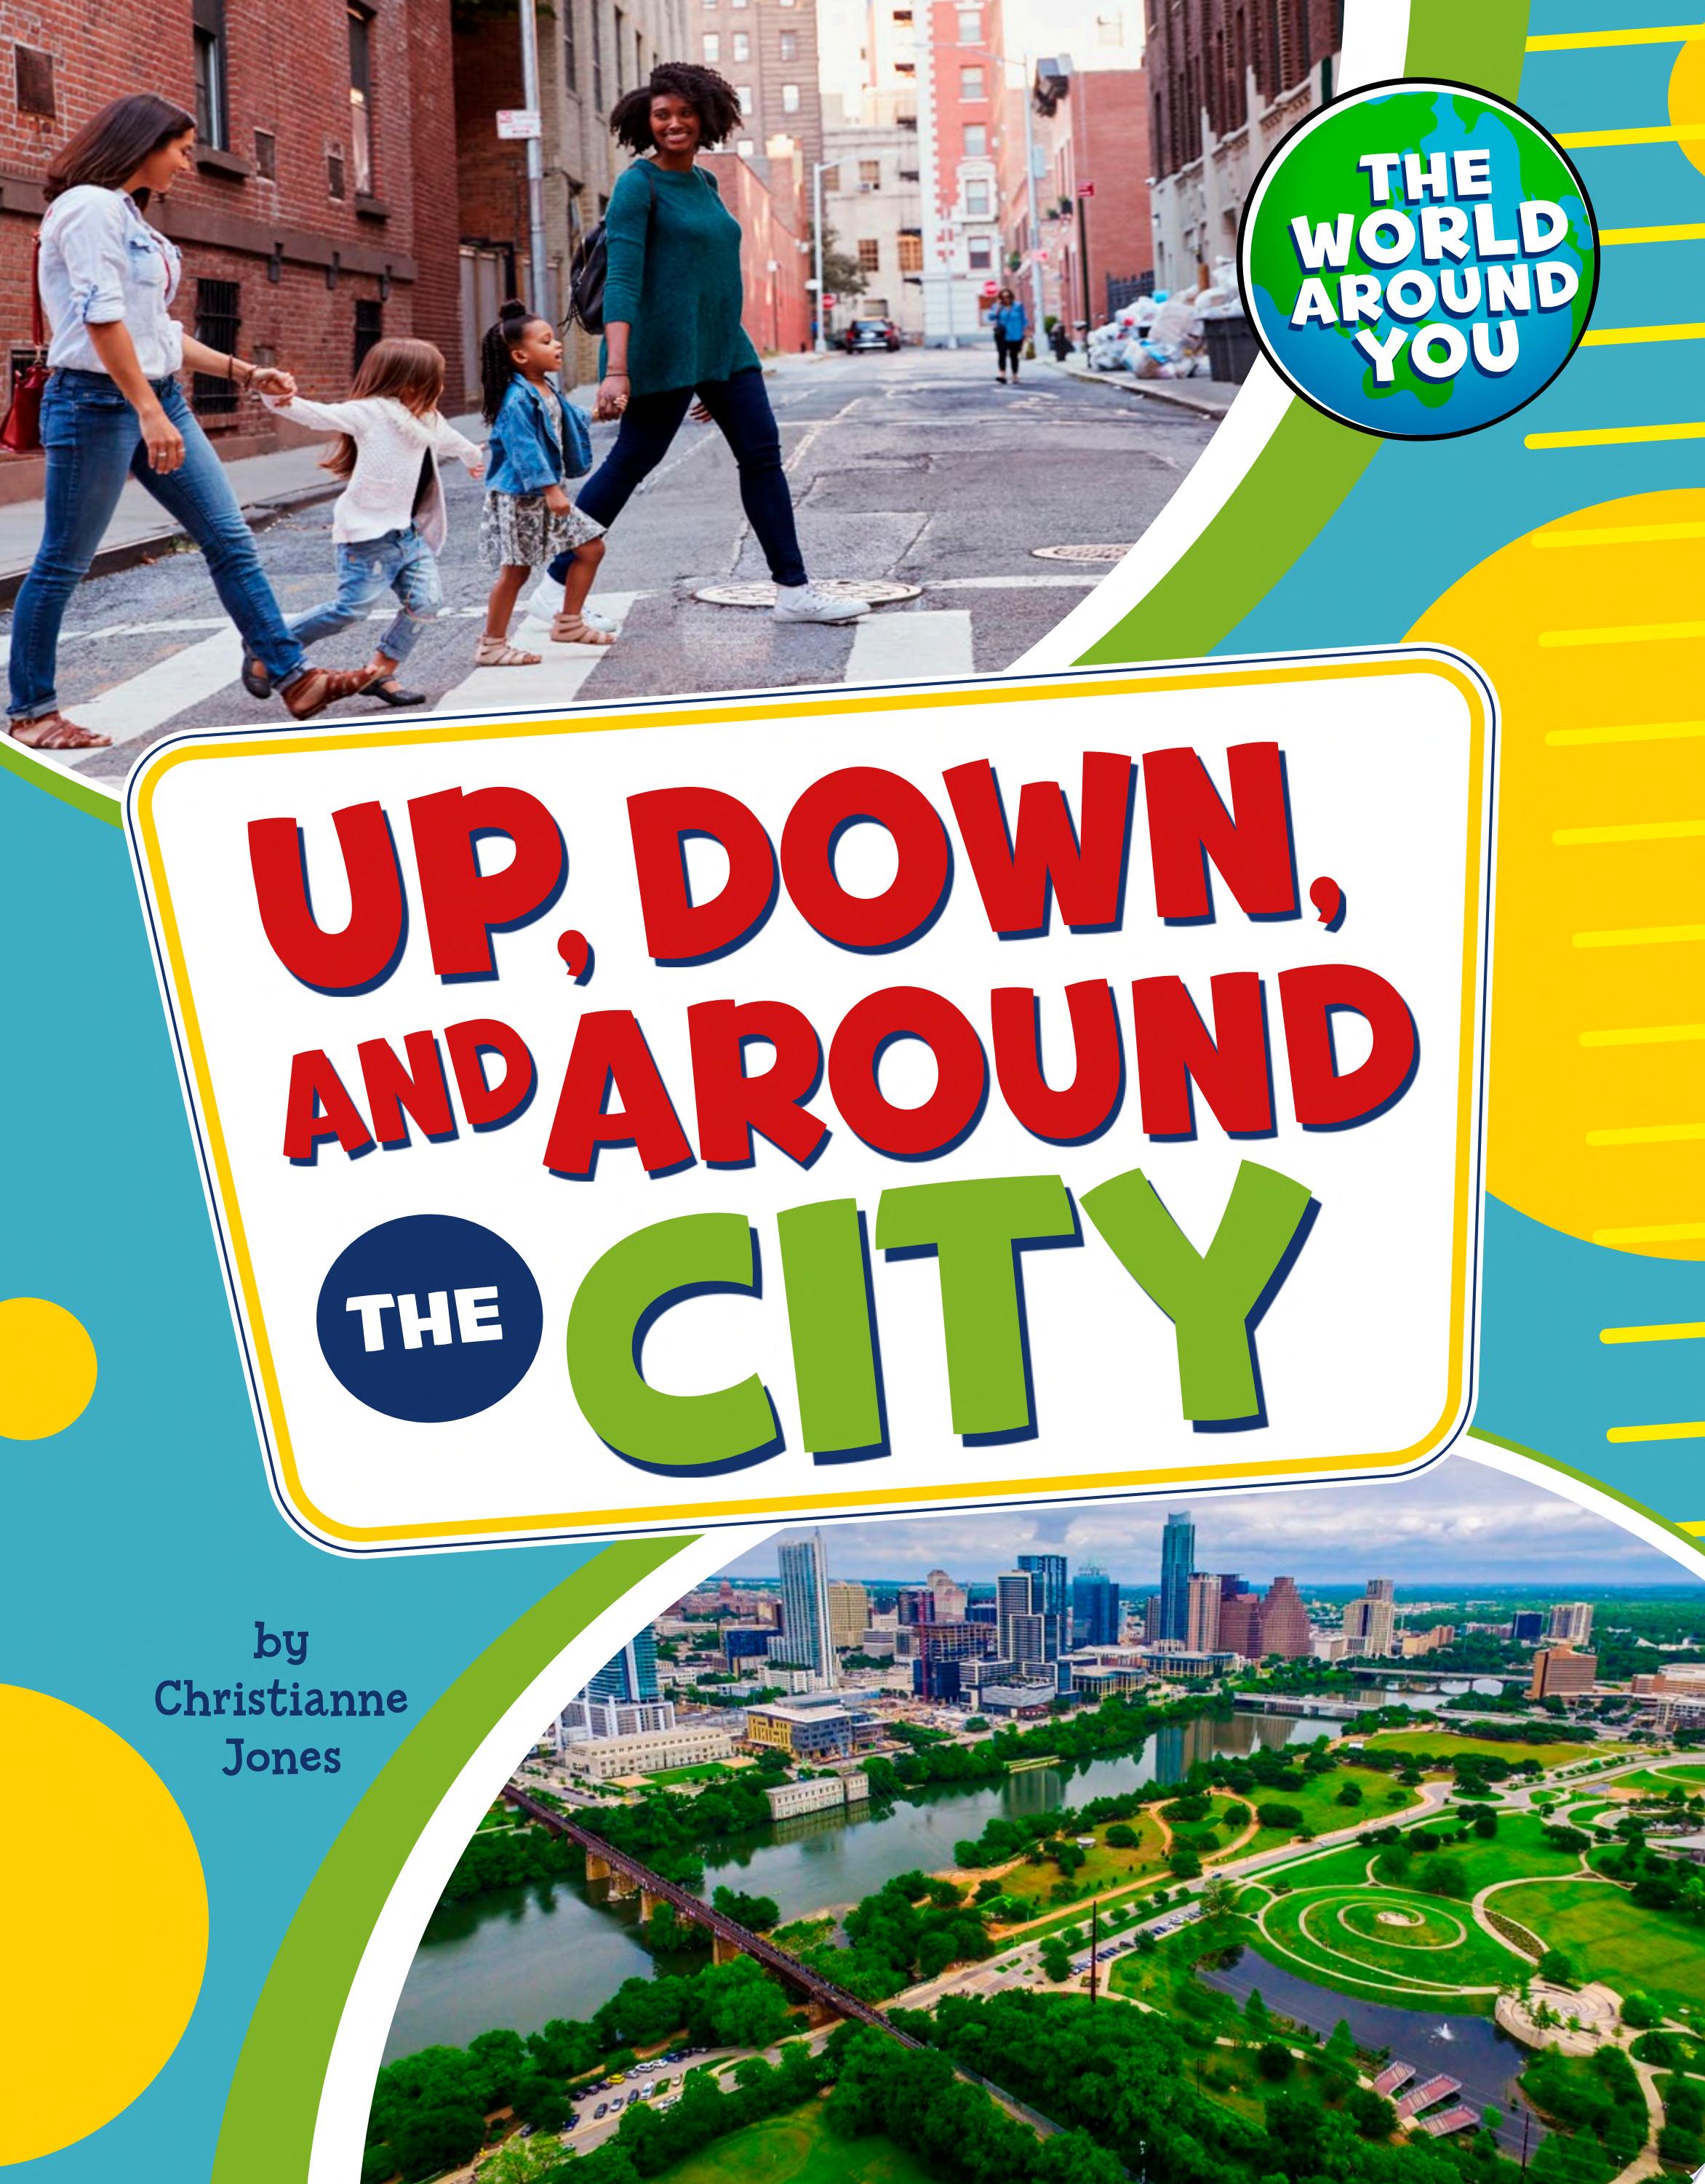 Image for "Up, Down, and Around the City"